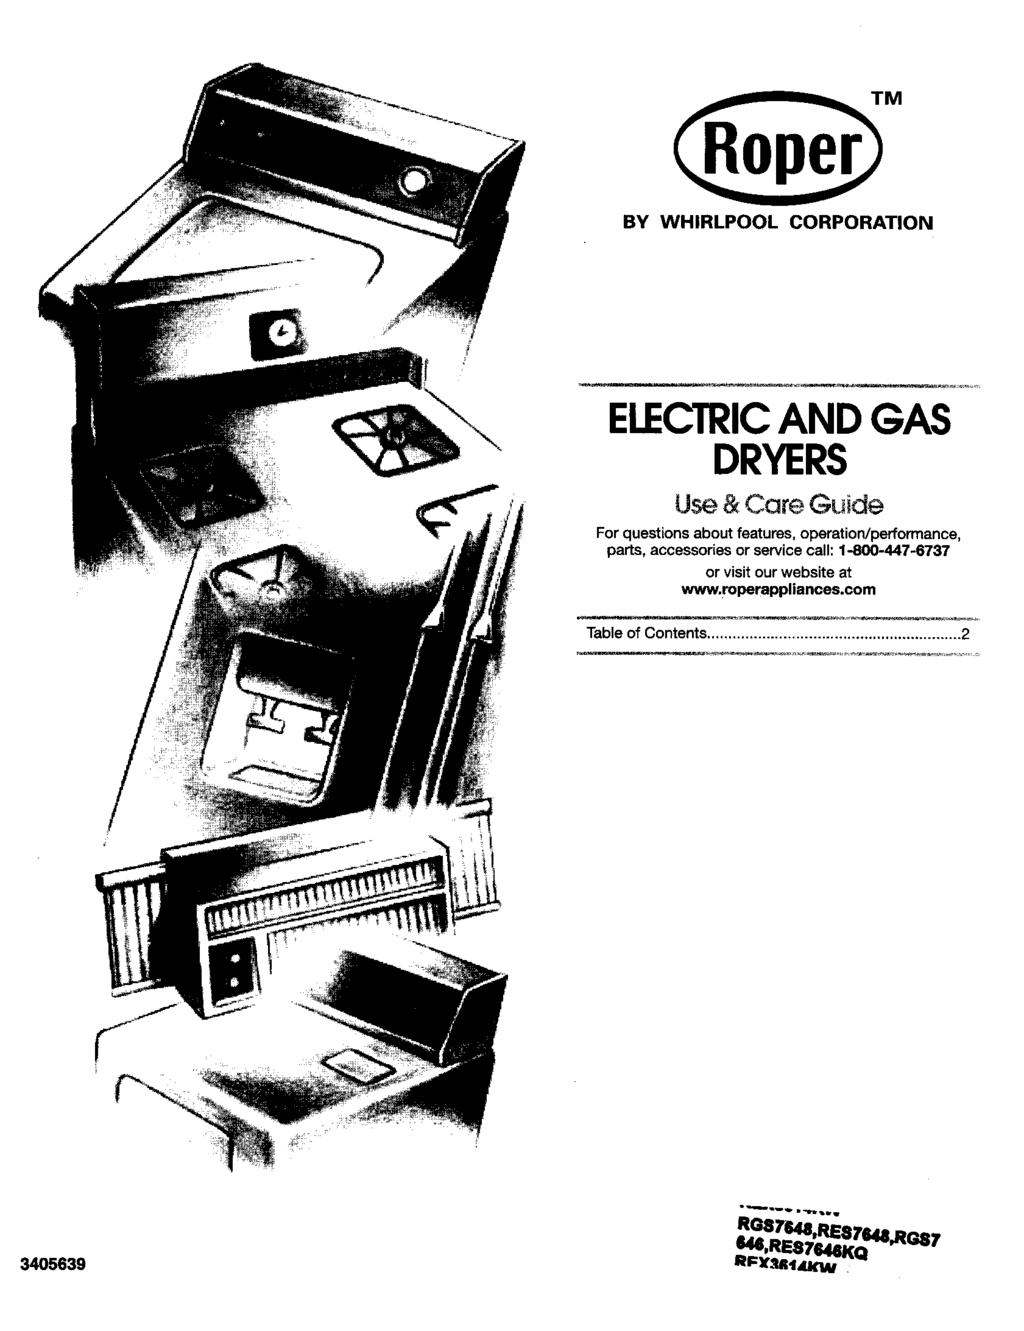 M BY WHIRLPOOL CORPORATION ELECTRICAND GAS DRYERS U_ & Care Guide For questions about features, operation/performance, parts, accessories or service